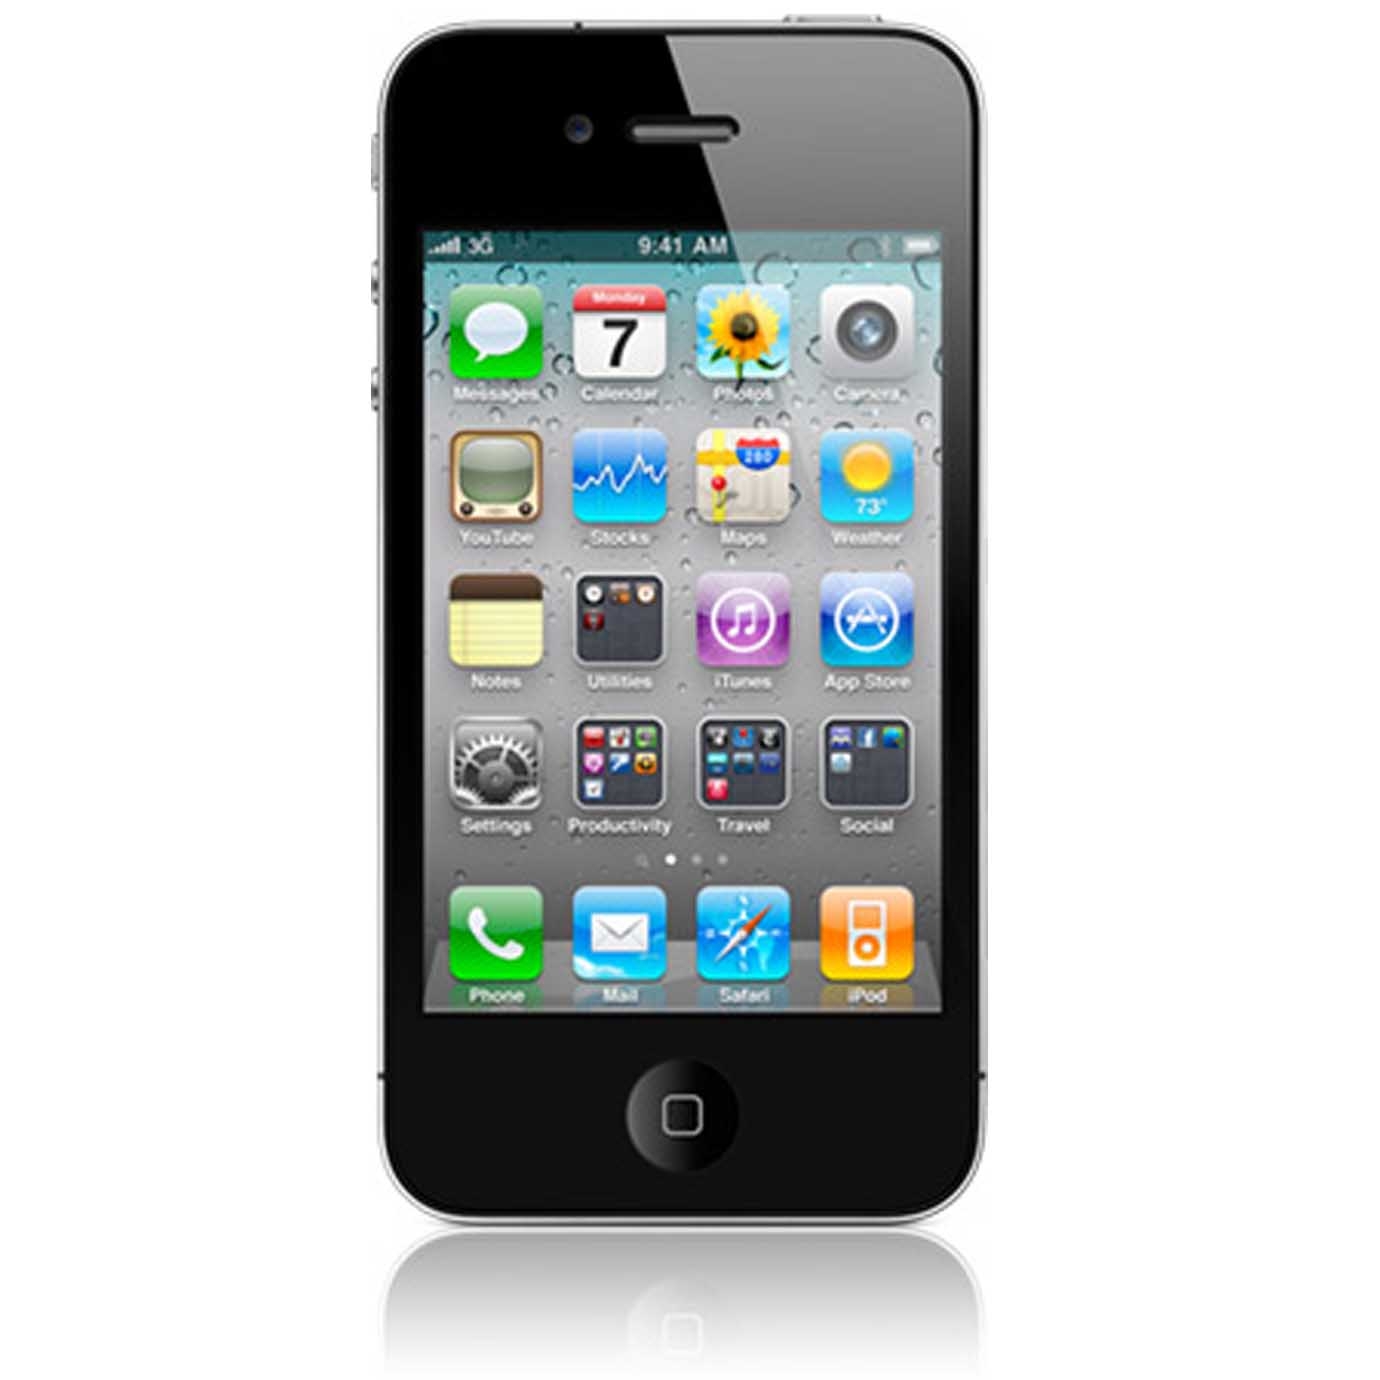 Refurbished iPhone 4 to be available for Rs. 22,400.